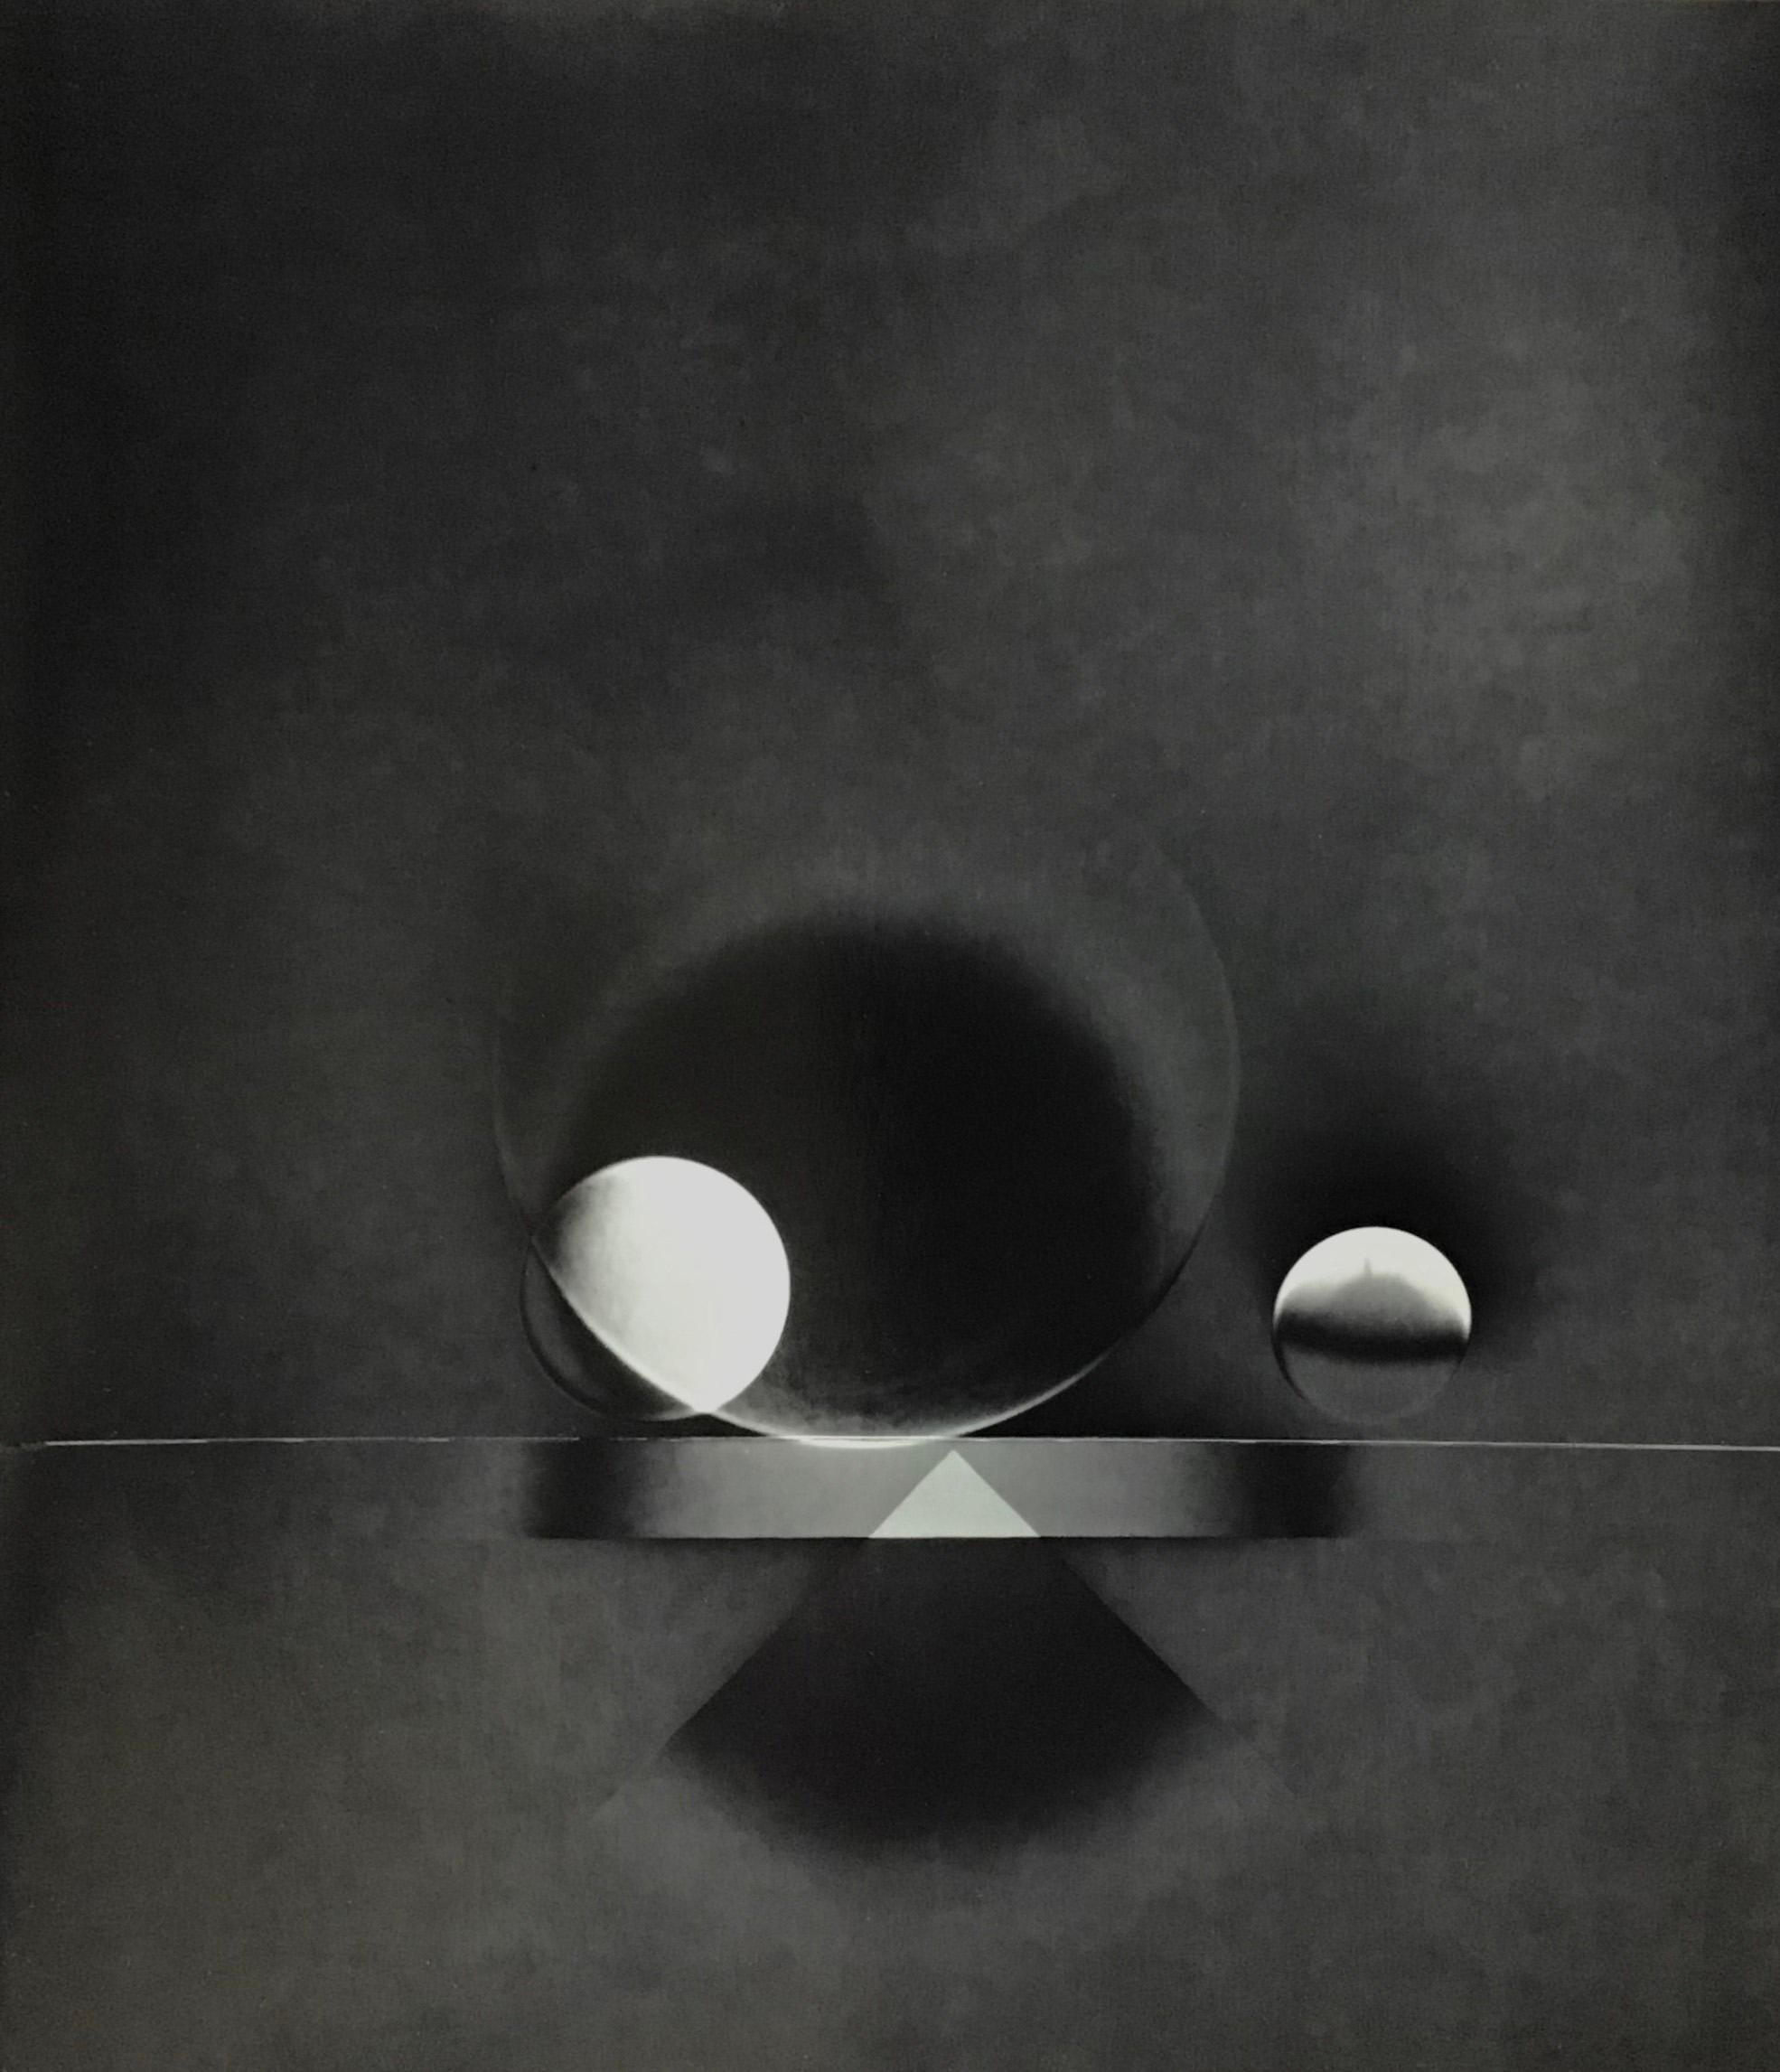 ATO>MIC #13, Unique Silver Luminogram Print, Two spheres and triangle with shade